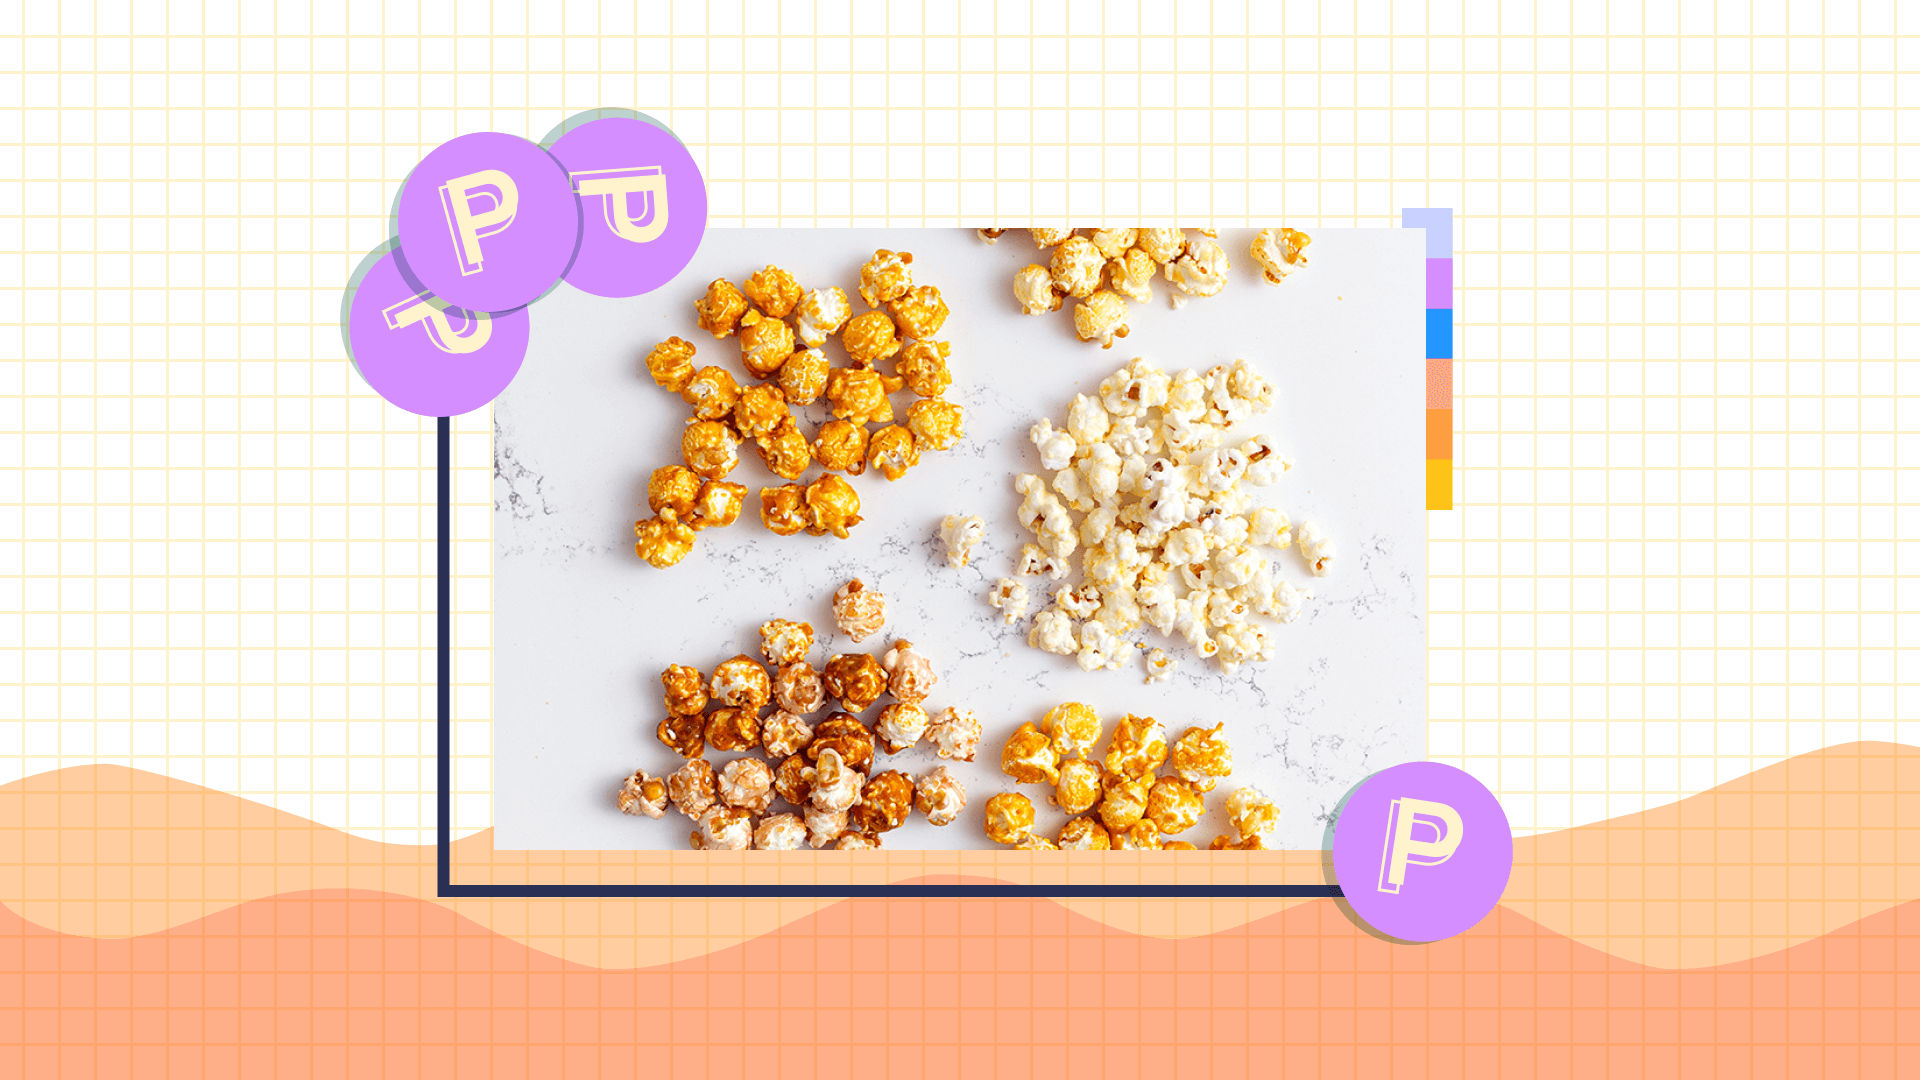 EATABLE Popcorn Brings Snacking to a New Level